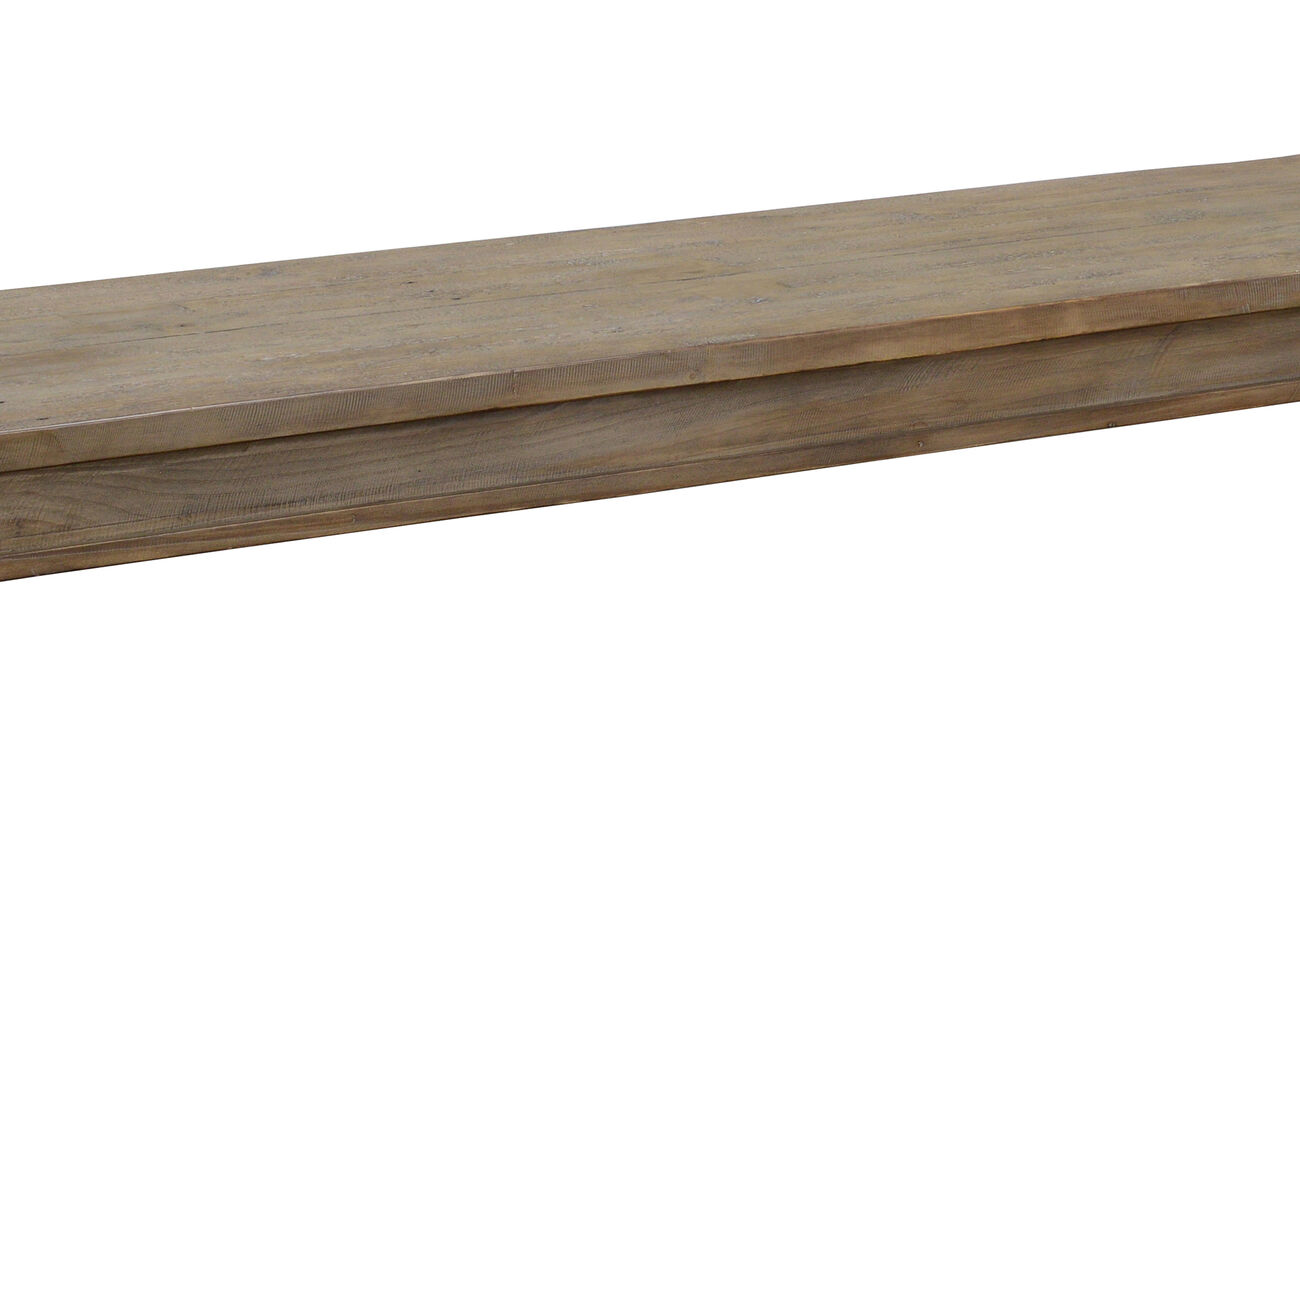 Rectangular Reclaimed Wood Bench with Grains and Knots, Brown